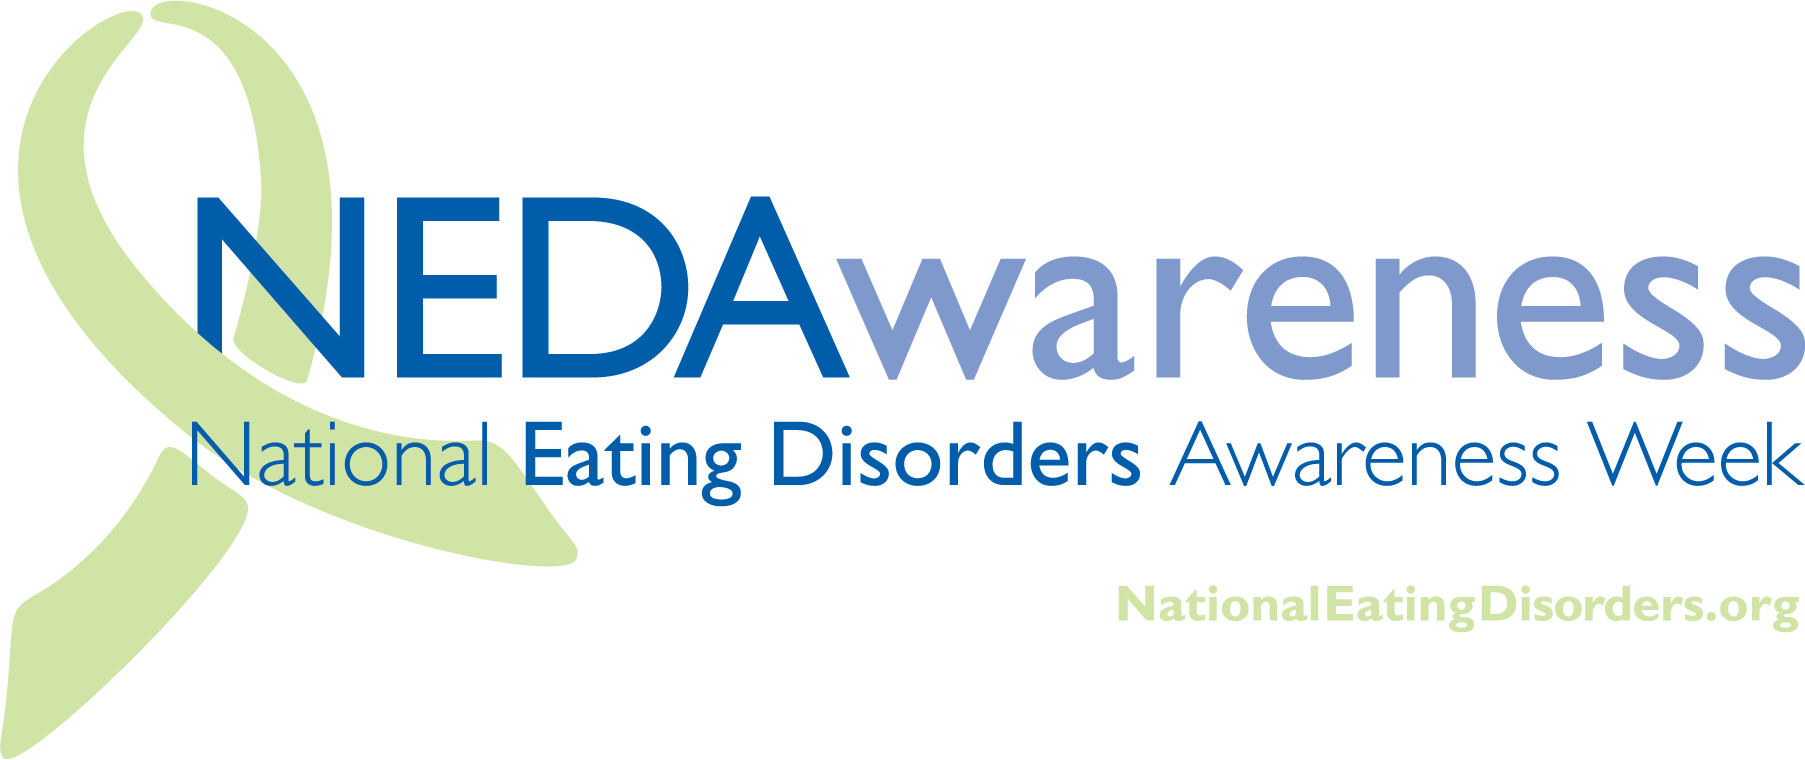 How to Advocate for Eating Disorders, how to help eating disorders, 8 Easy Ways to Advocate for the Eating Disorder Community by eating disorder survivor Stephanie Ziajka from Diary of a Debutante